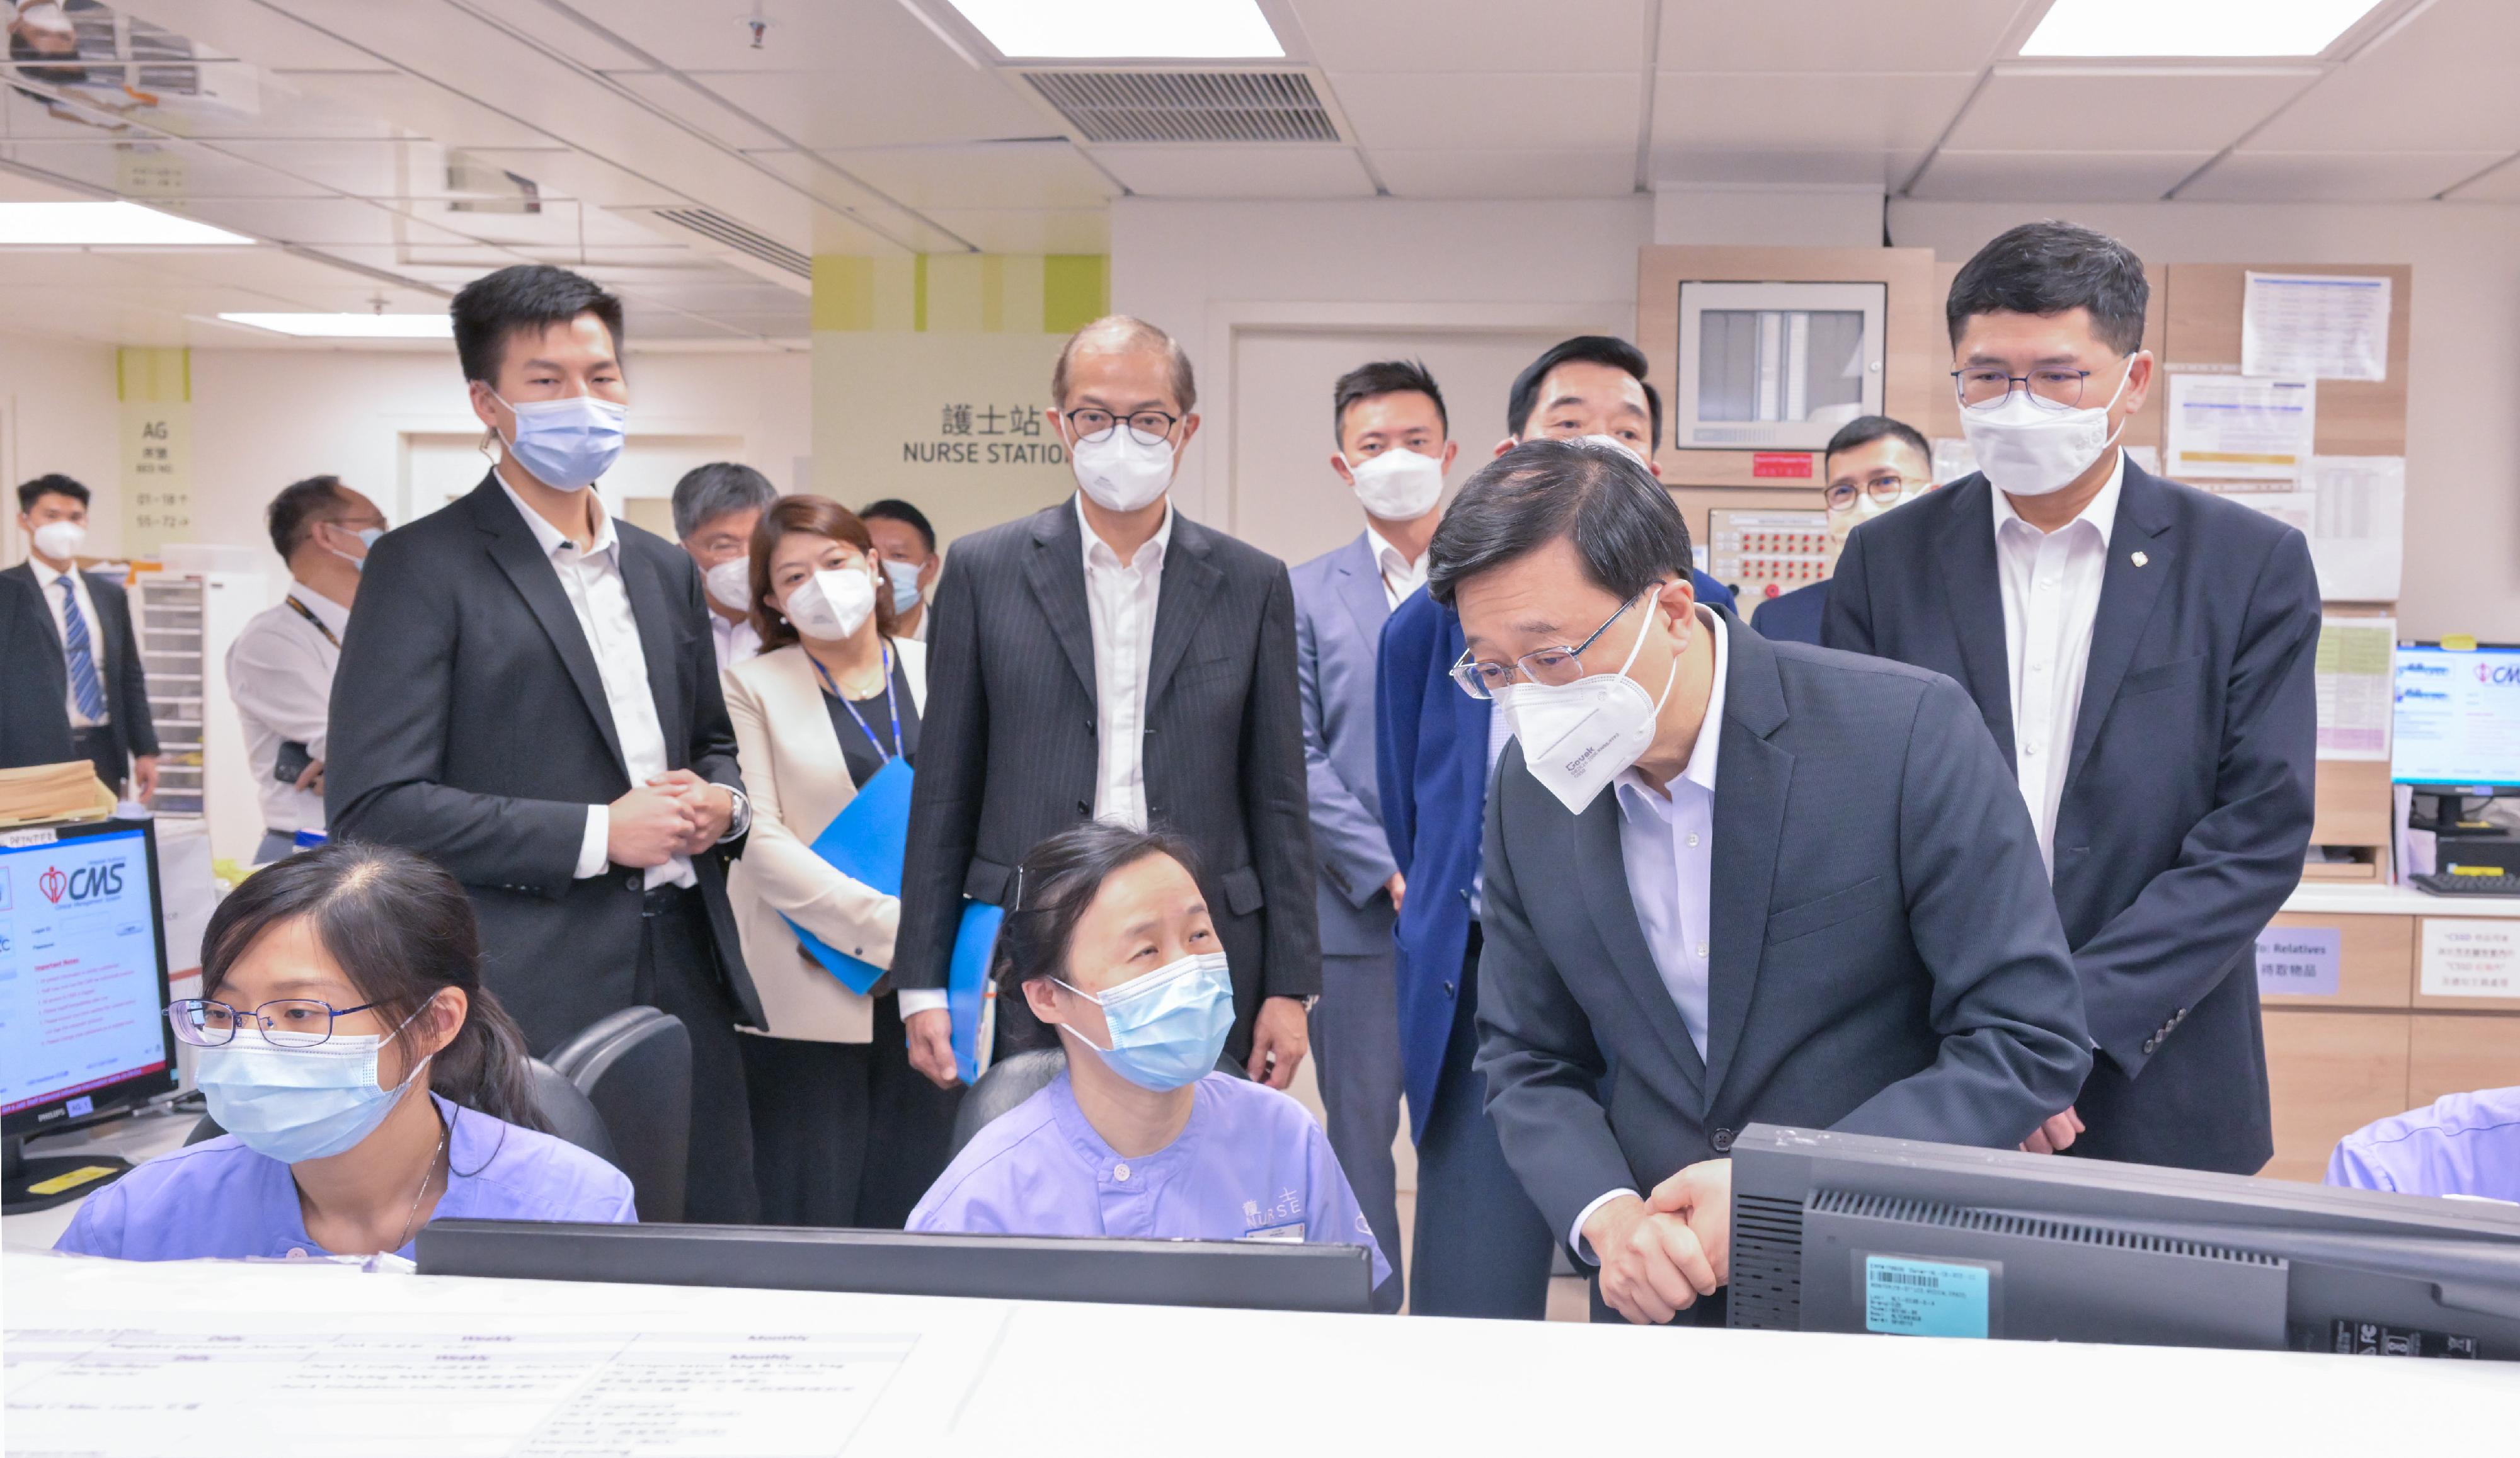 The Chief Executive, Mr John Lee (front row, first right), today (August 17) inspected the North Lantau Hospital Hong Kong Infection Control Centre of the Hospital Authority (HA) and chatted with medical professionals of the Centre. Looking on are the Secretary for Health, Professor Lo Chung-mau (second row, second left); the Chairman of the HA, Mr Henry Fan (second row, second right), and the Chief Executive of the HA, Dr Tony Ko (second row, first right).